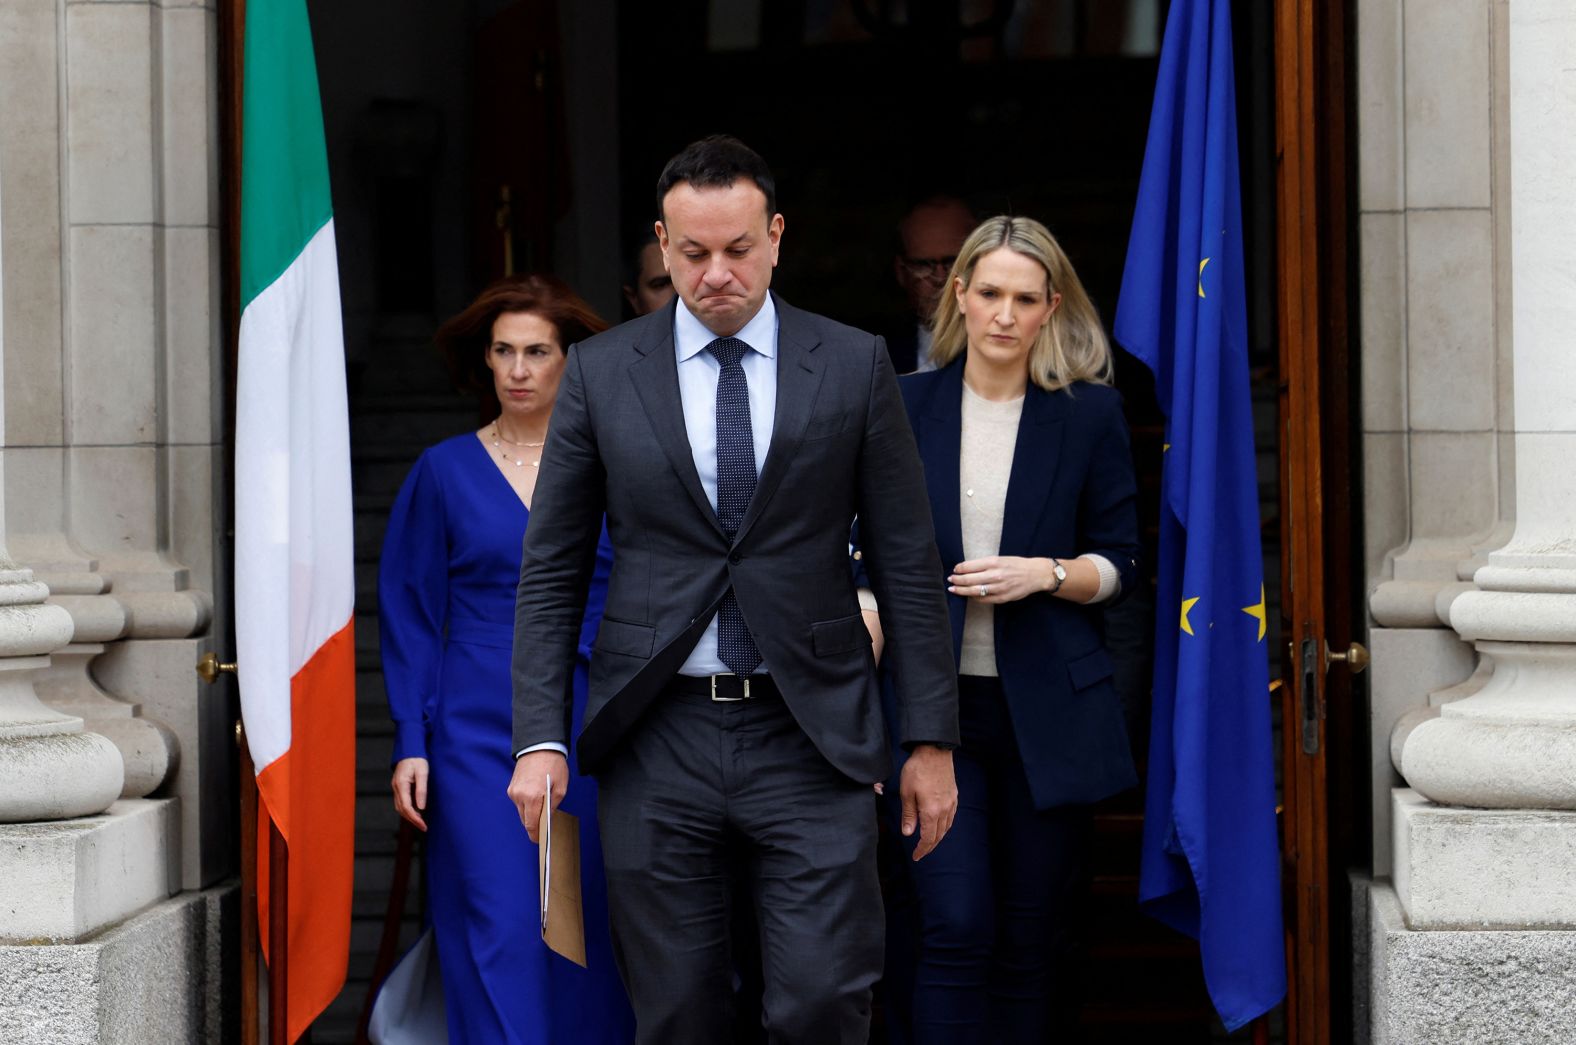 Ireland's Prime Minister <a href="index.php?page=&url=https%3A%2F%2Fwww.cnn.com%2F2024%2F03%2F20%2Feurope%2Fleo-varadkar-ireland-prime-minister-resignation-intl%2Findex.html" target="_blank">Leo Varadkar arrives to announce his resignation</a> in Dublin on Wednesday, March 20. Varadkar cited "personal and political, but mainly political reasons." He is the country's youngest premier and Ireland's first gay leader.